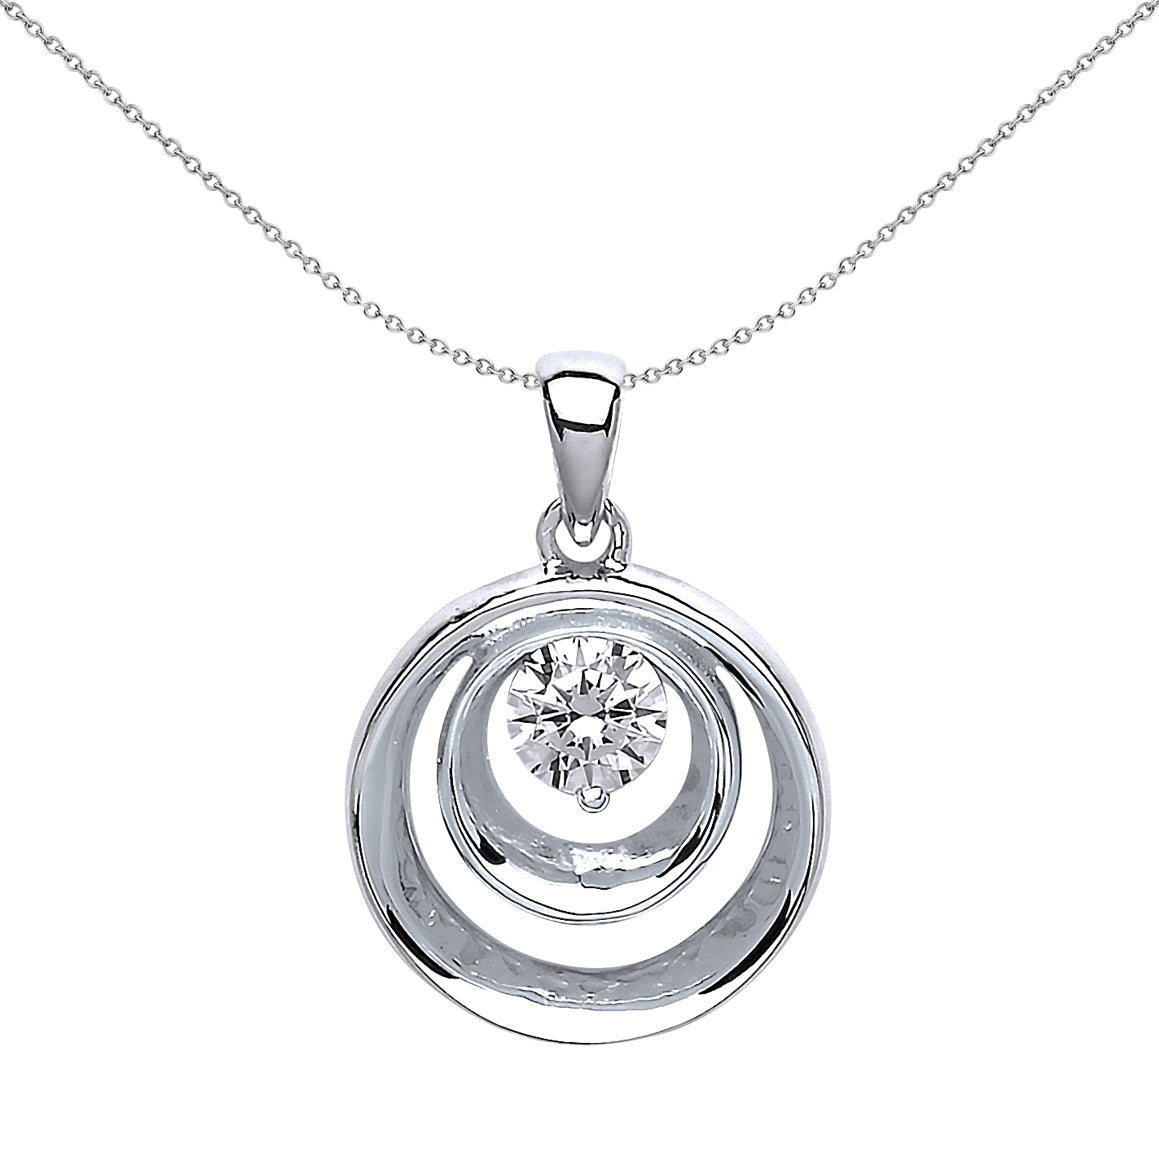 Silver  CZ Tunnel Rings Charm Necklace 18 inch - GVP398